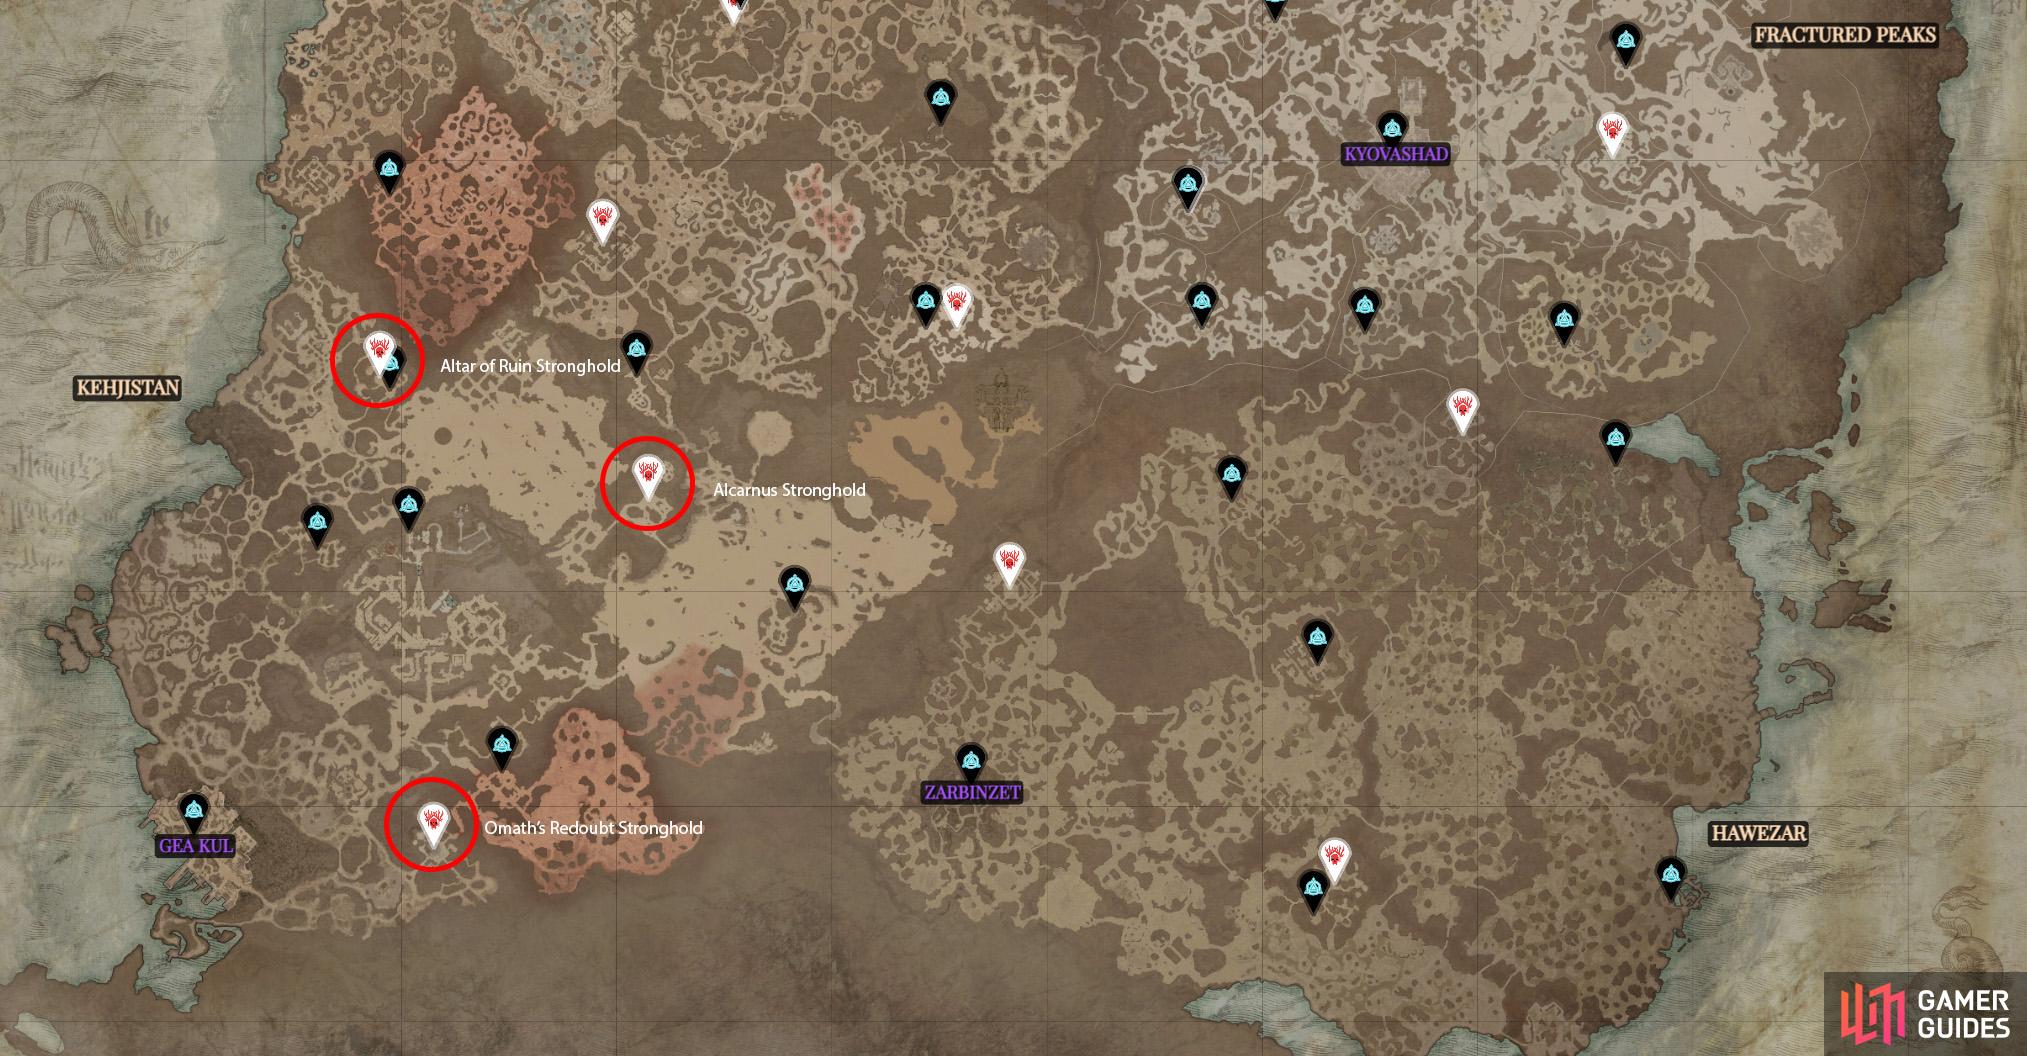 You can find the strongholds in these three locations